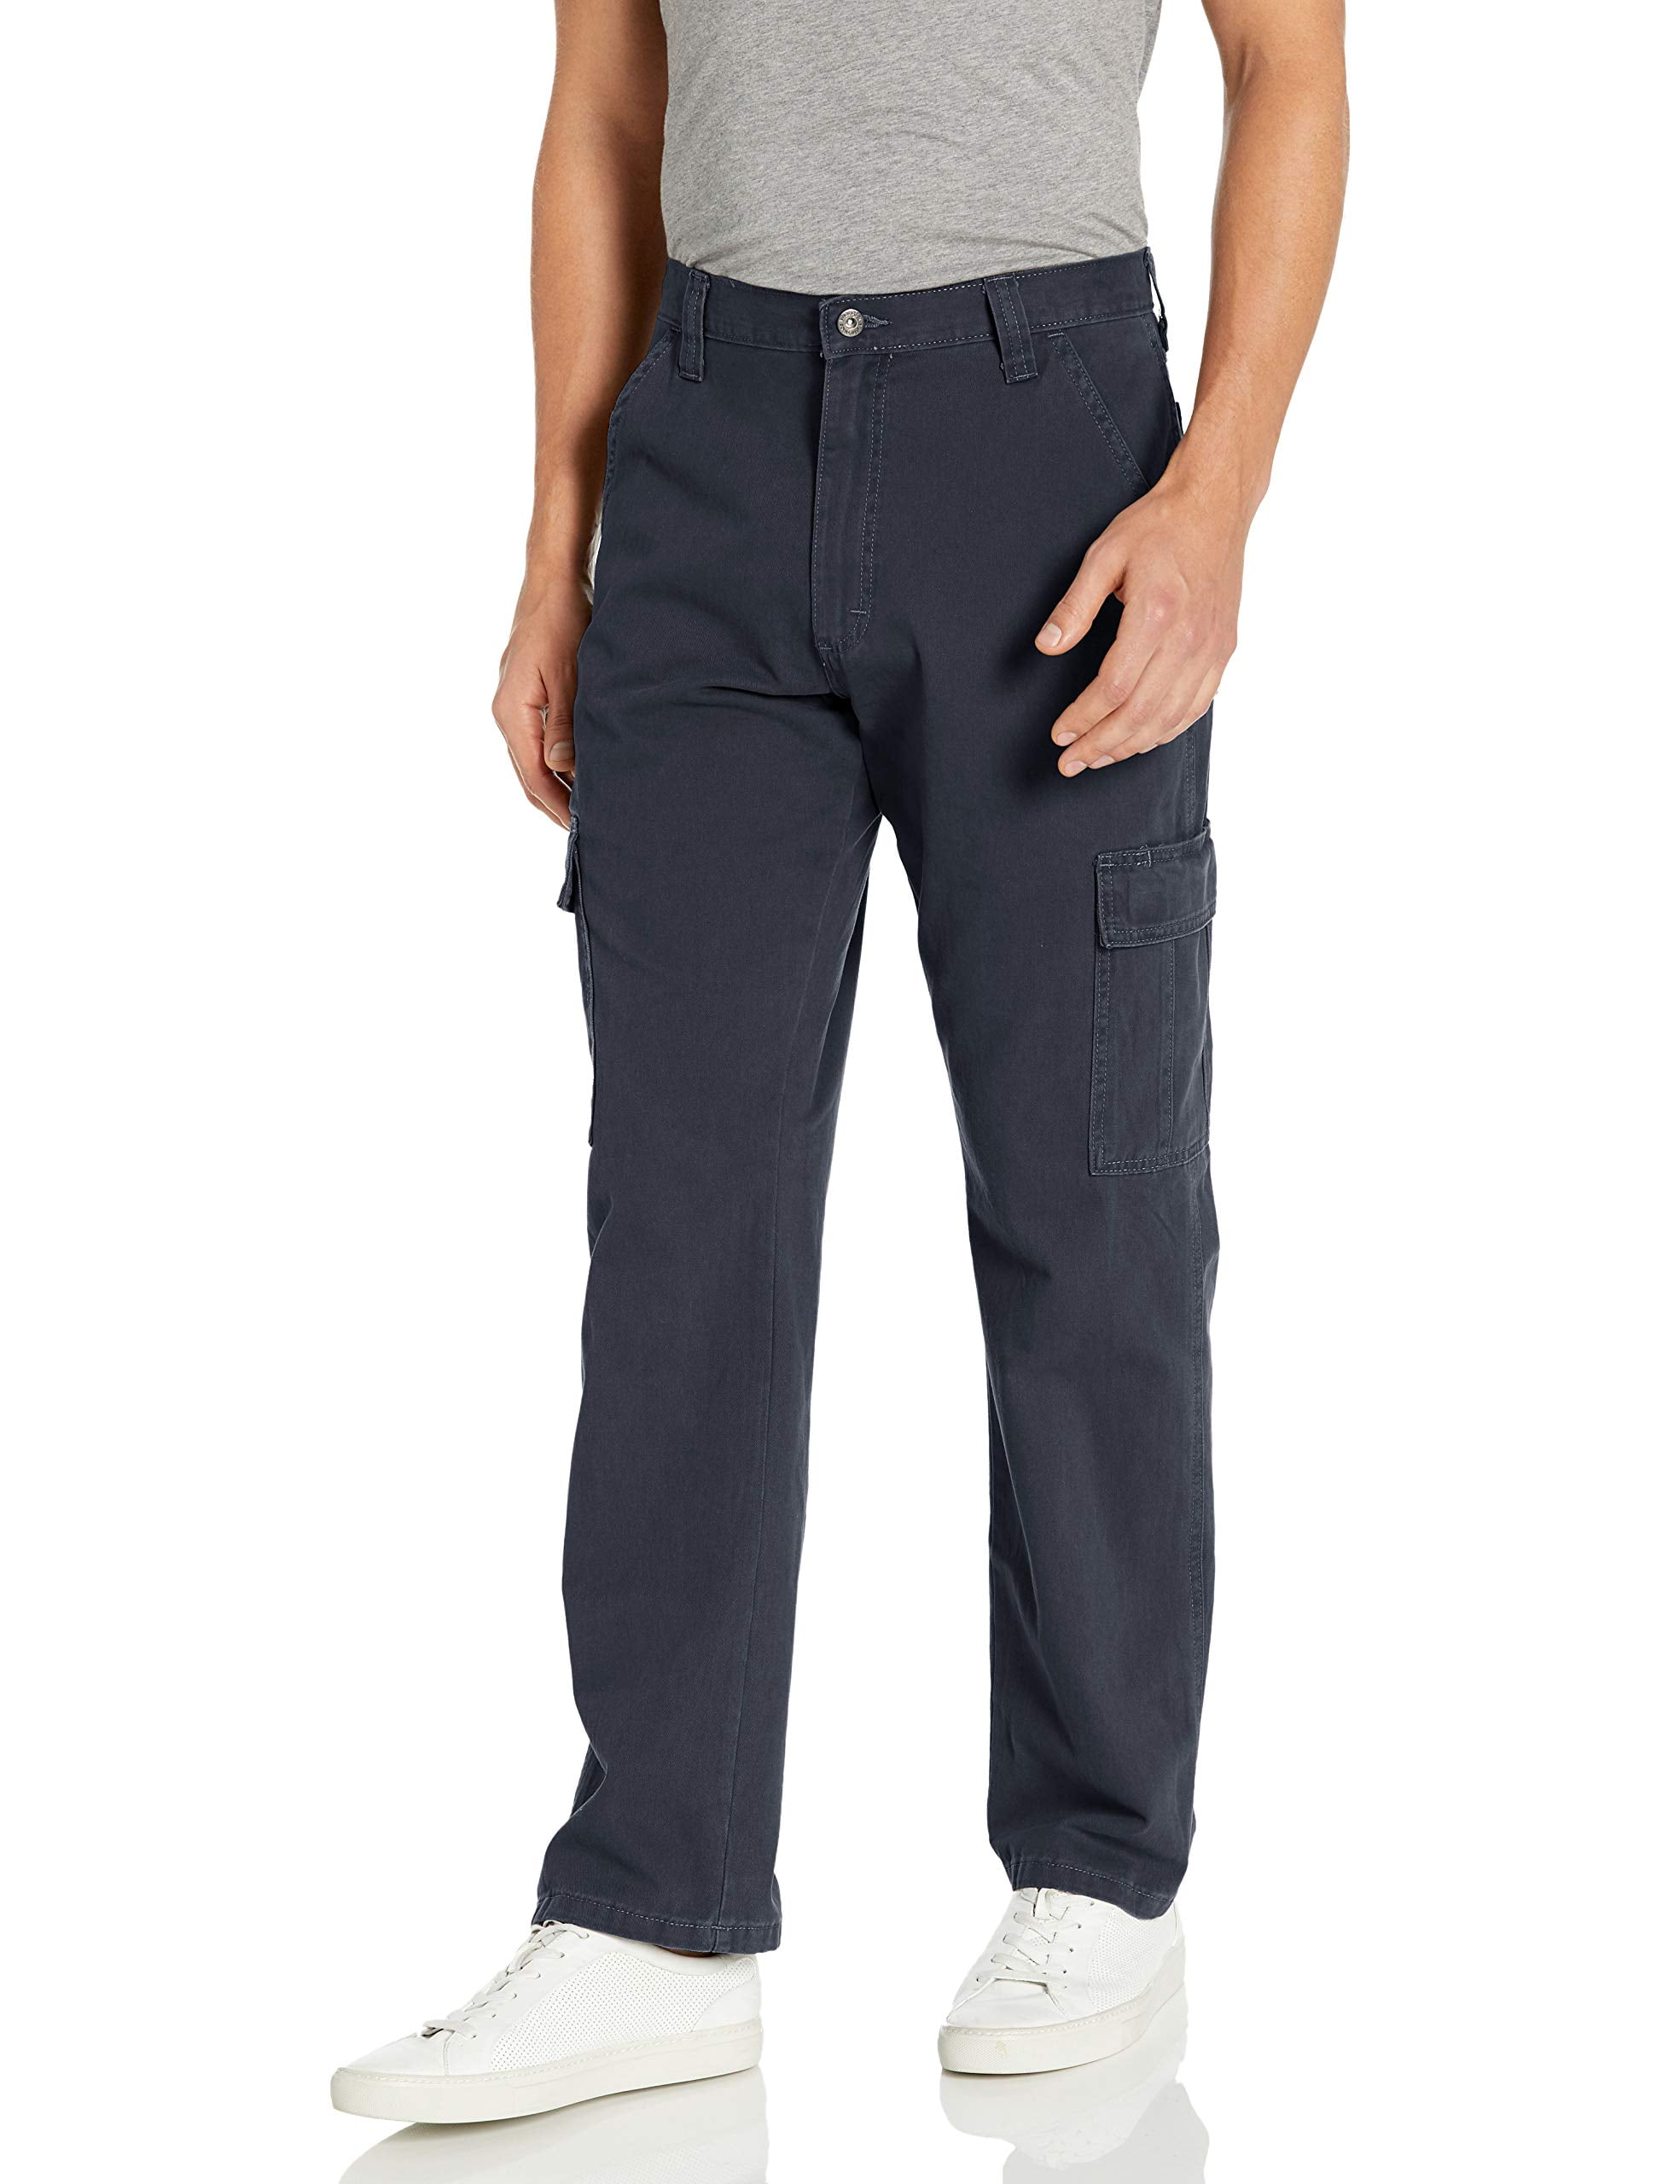 Wrangler Pants - Mens Pants Navy 36x29 Twill Button-Front Cargo 36 ...